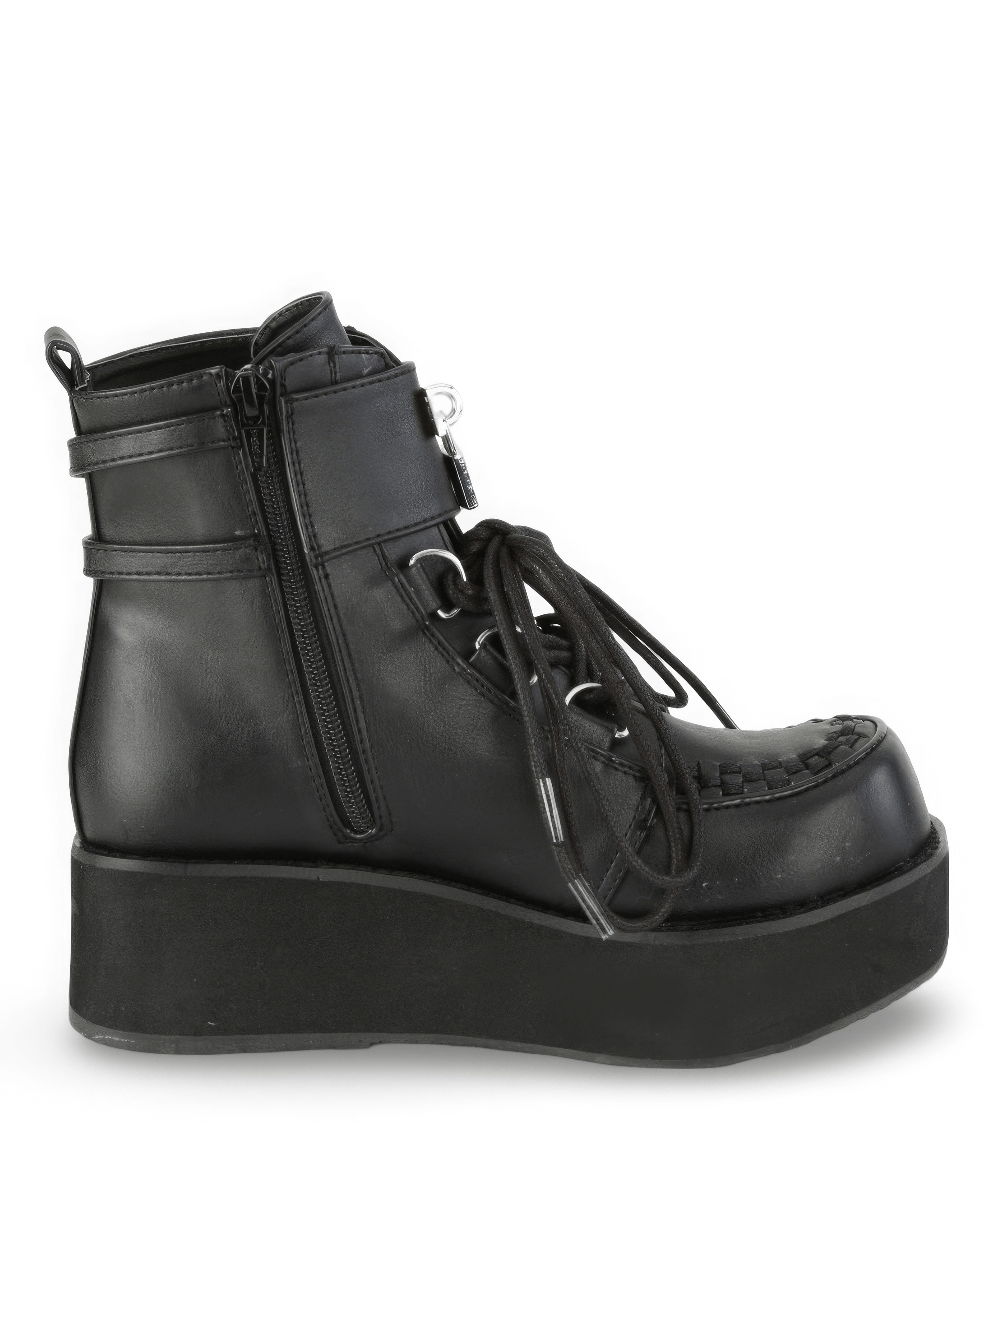 DEMONIA Platform Lace-Up Ankle Boots with Metal Lock Charm